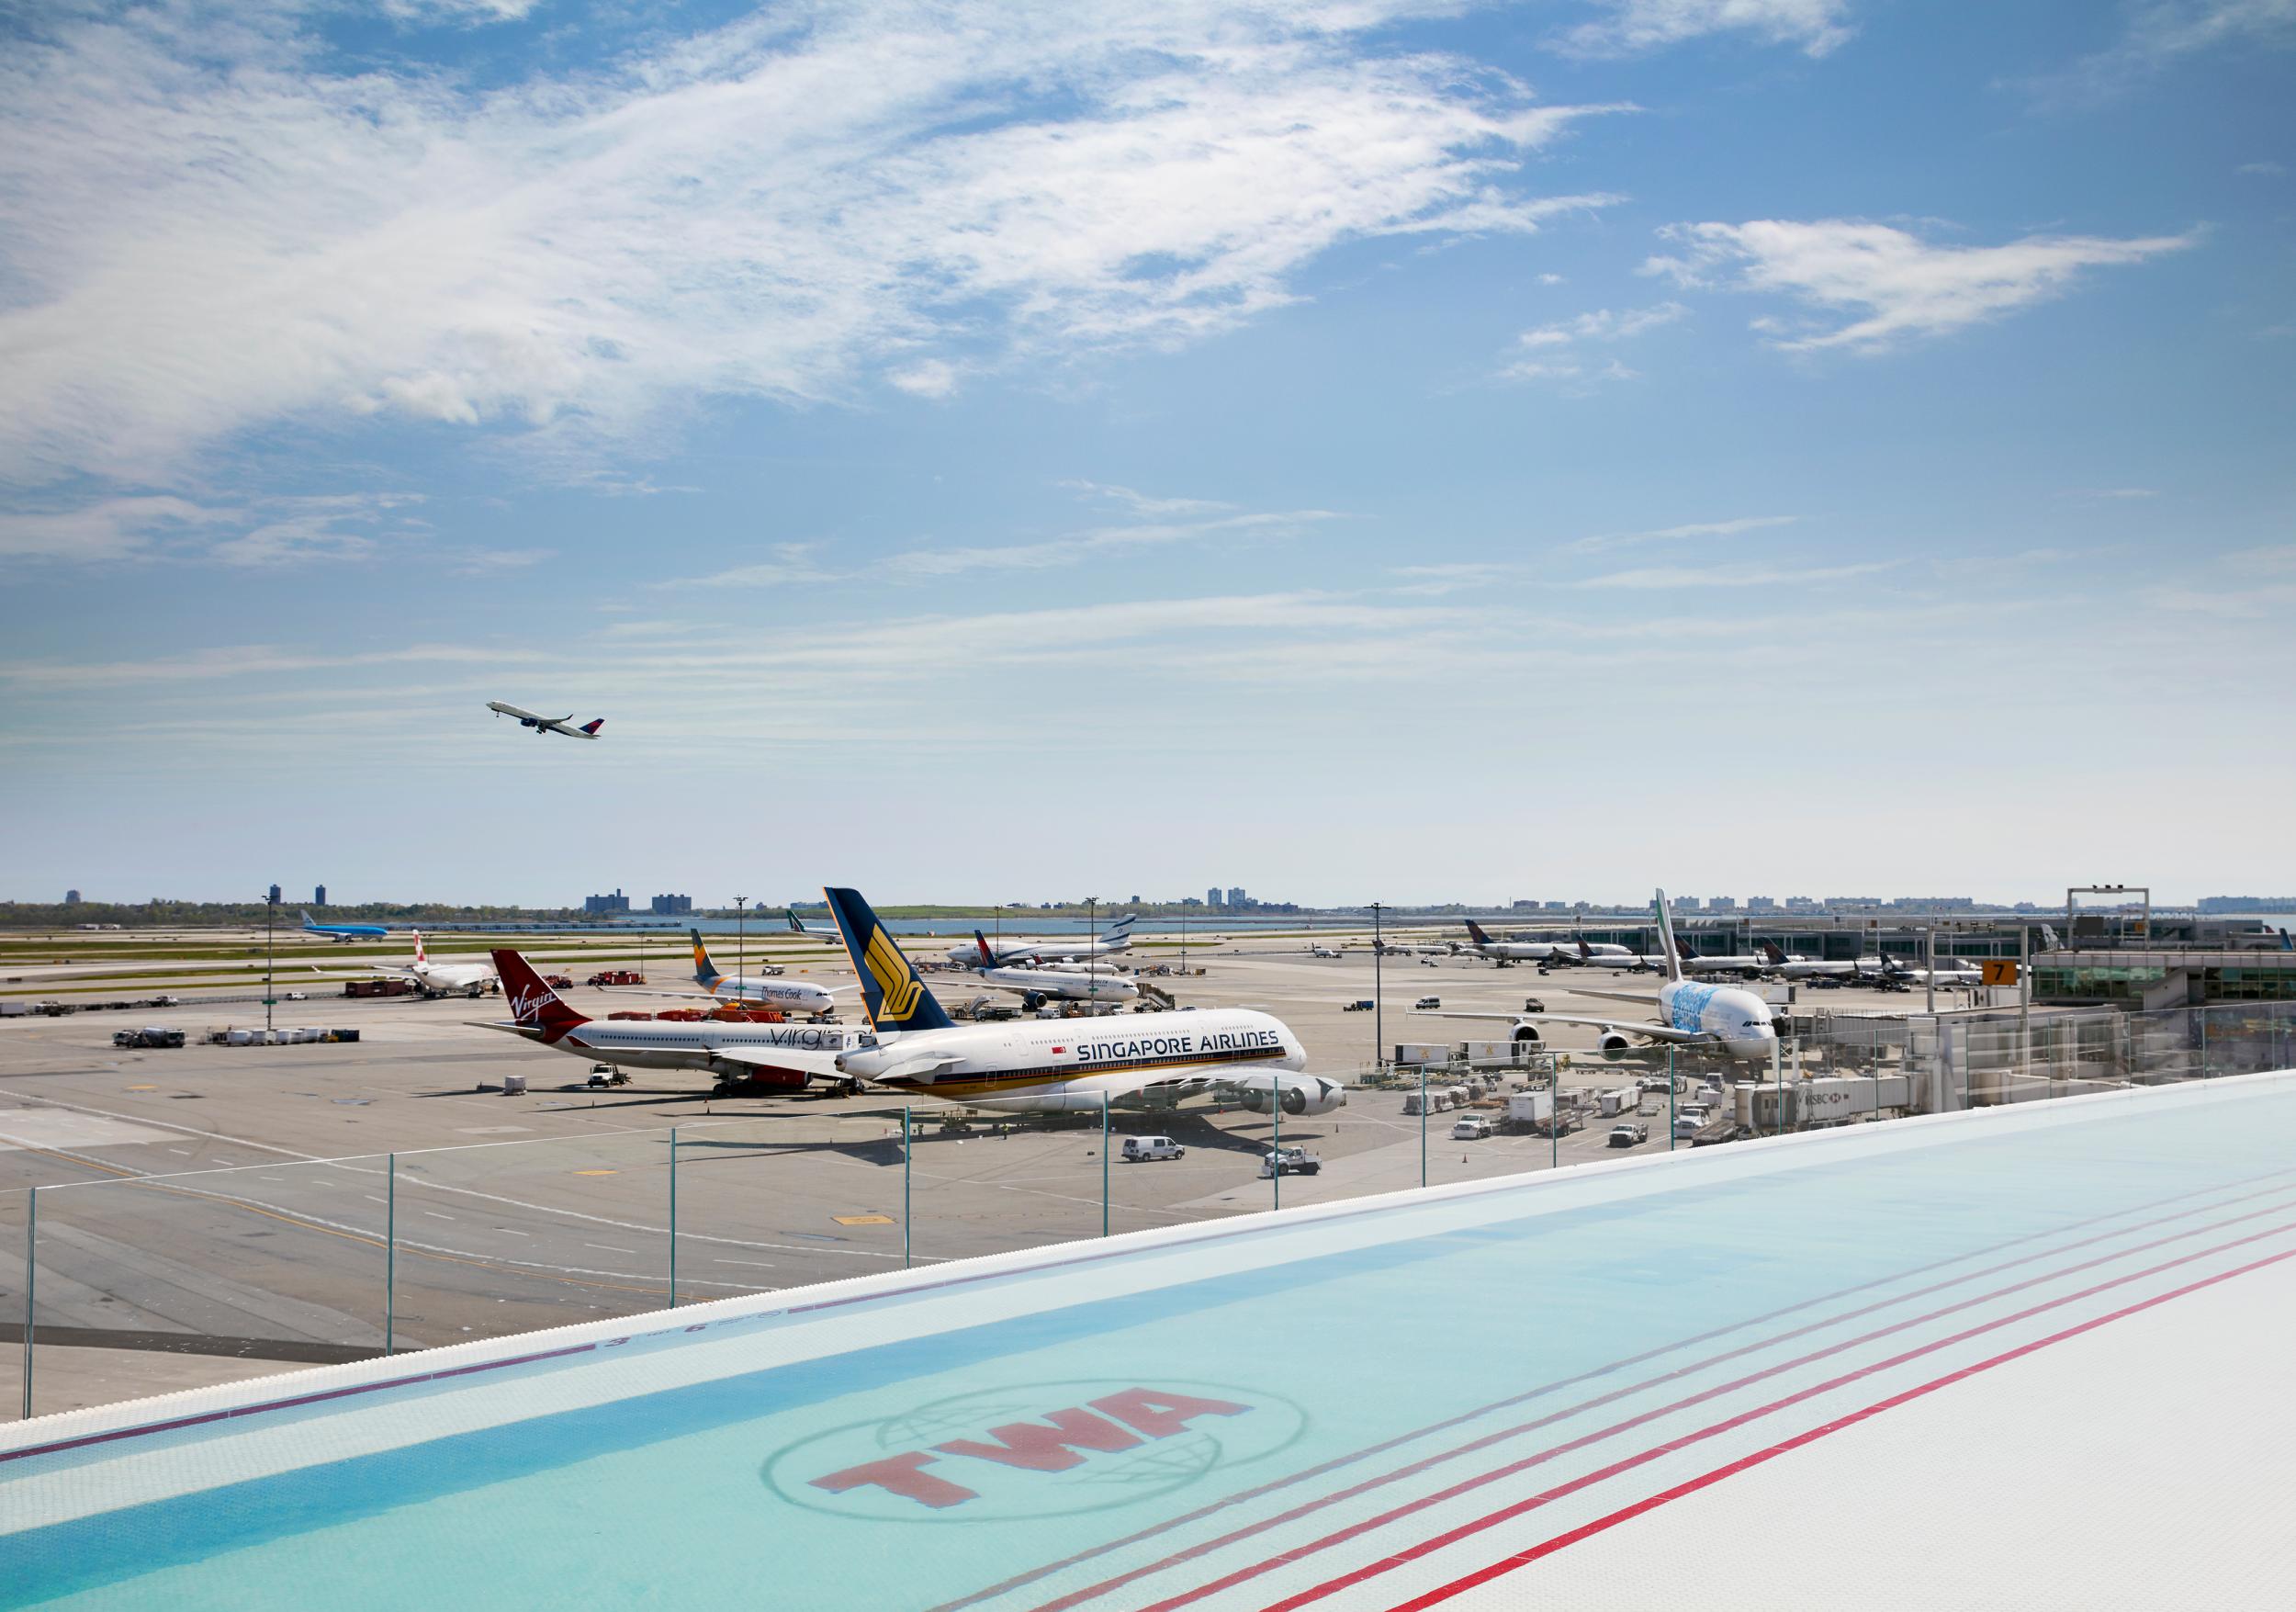 The rooftop pool, which overlooks the runway